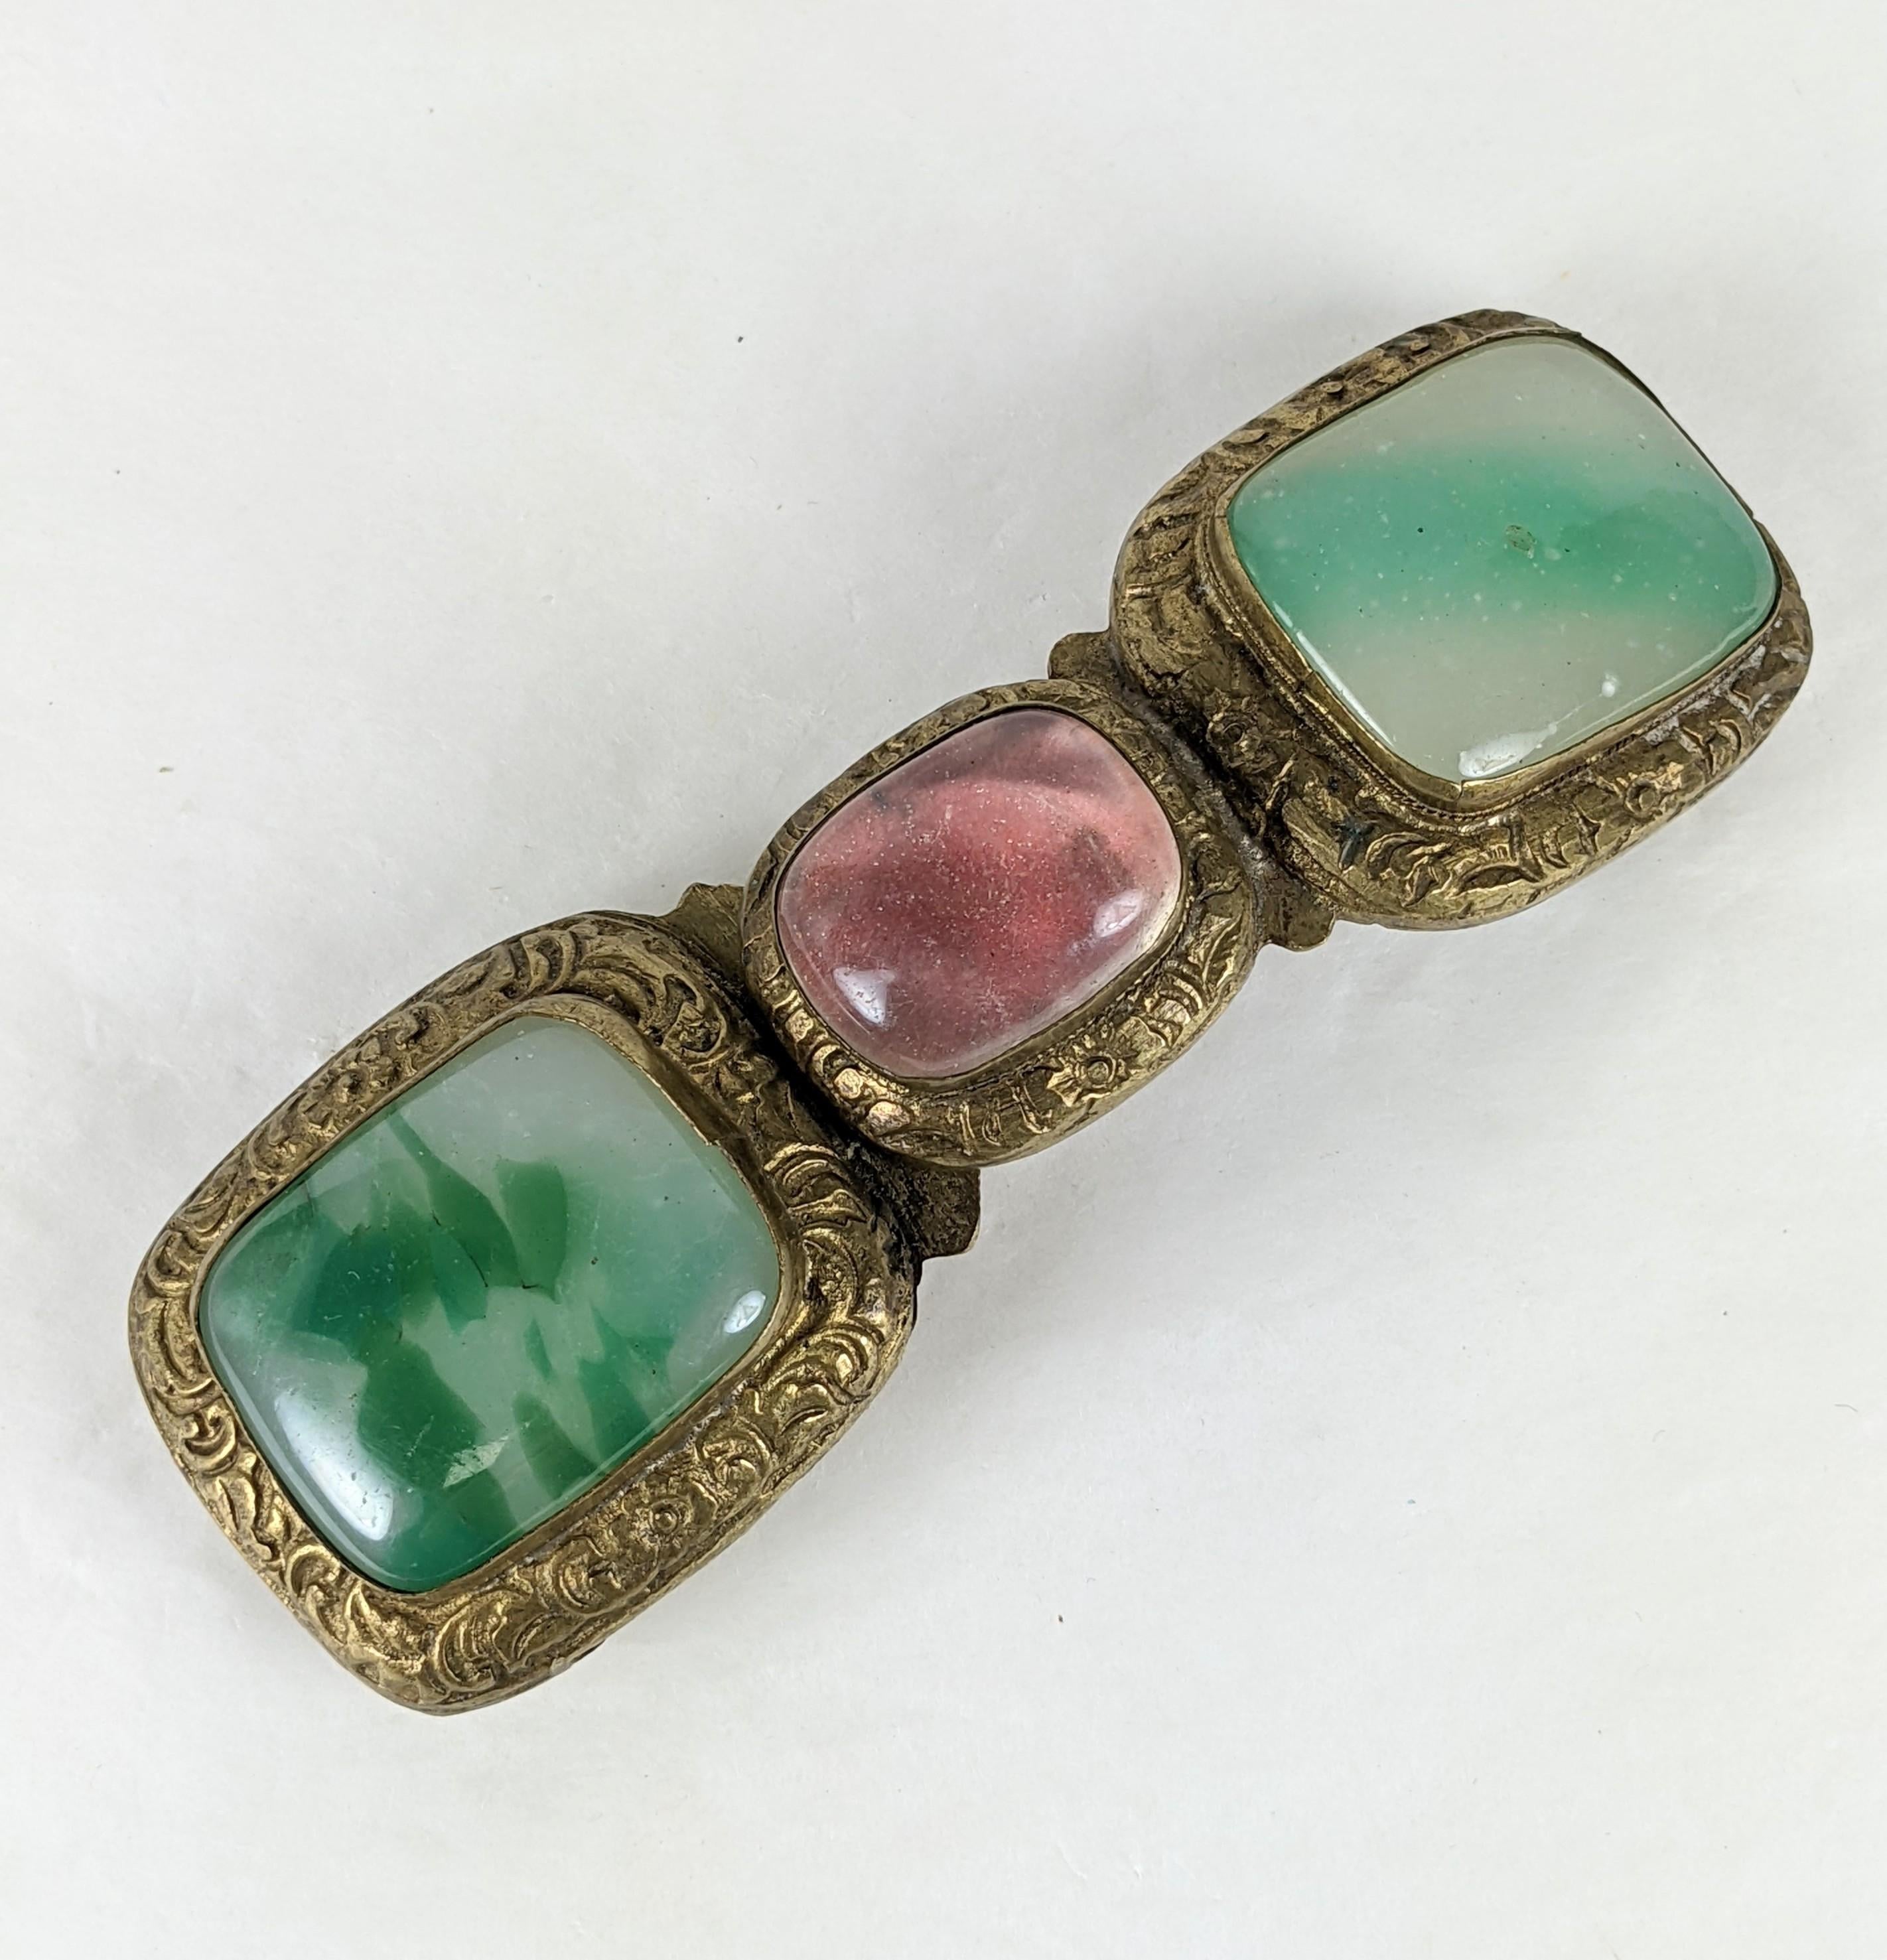 Antique Chinese Peking Glass Buckle from the late 19th Century. Set in incised bronze with decorative scrolled border and floral patterned back. Peking glass is used to replicate jade and an oval cabochon is set over pinkish red paper/textile to